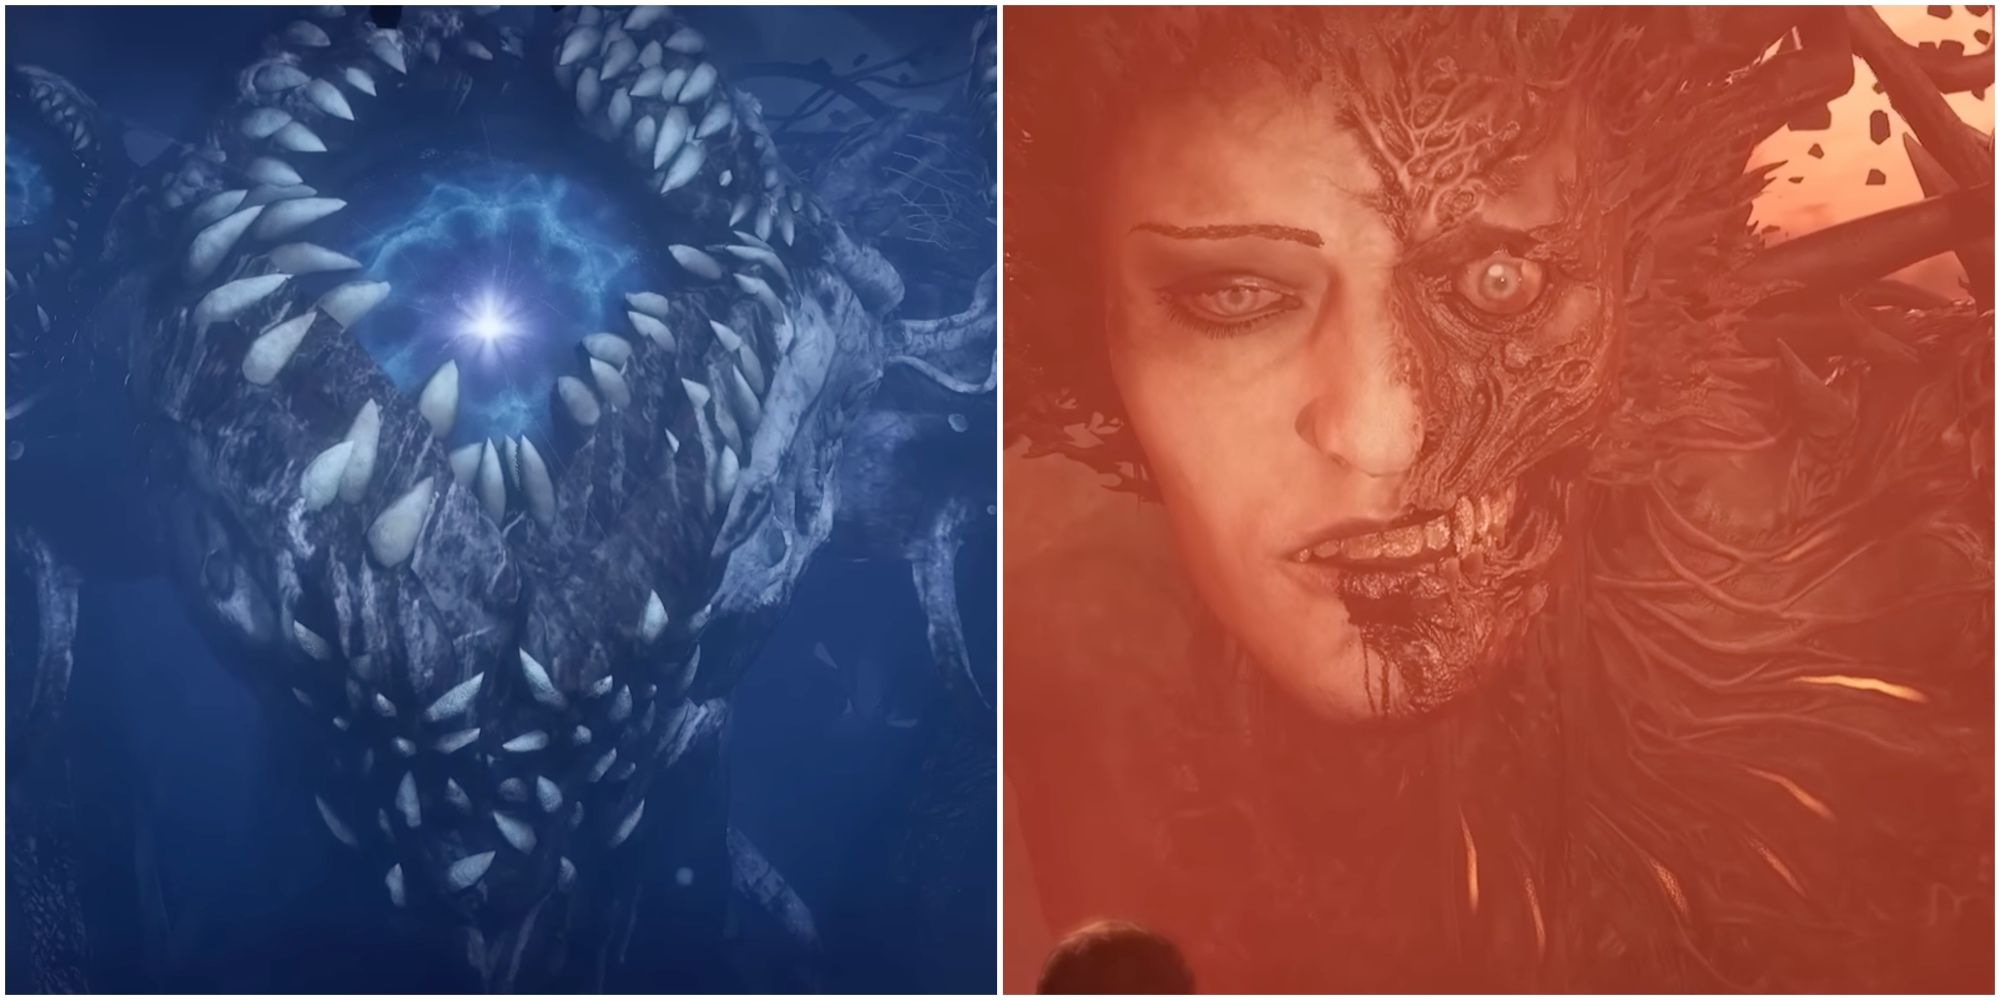 Split image showing the Putrid Mother and Adyr the demon god.